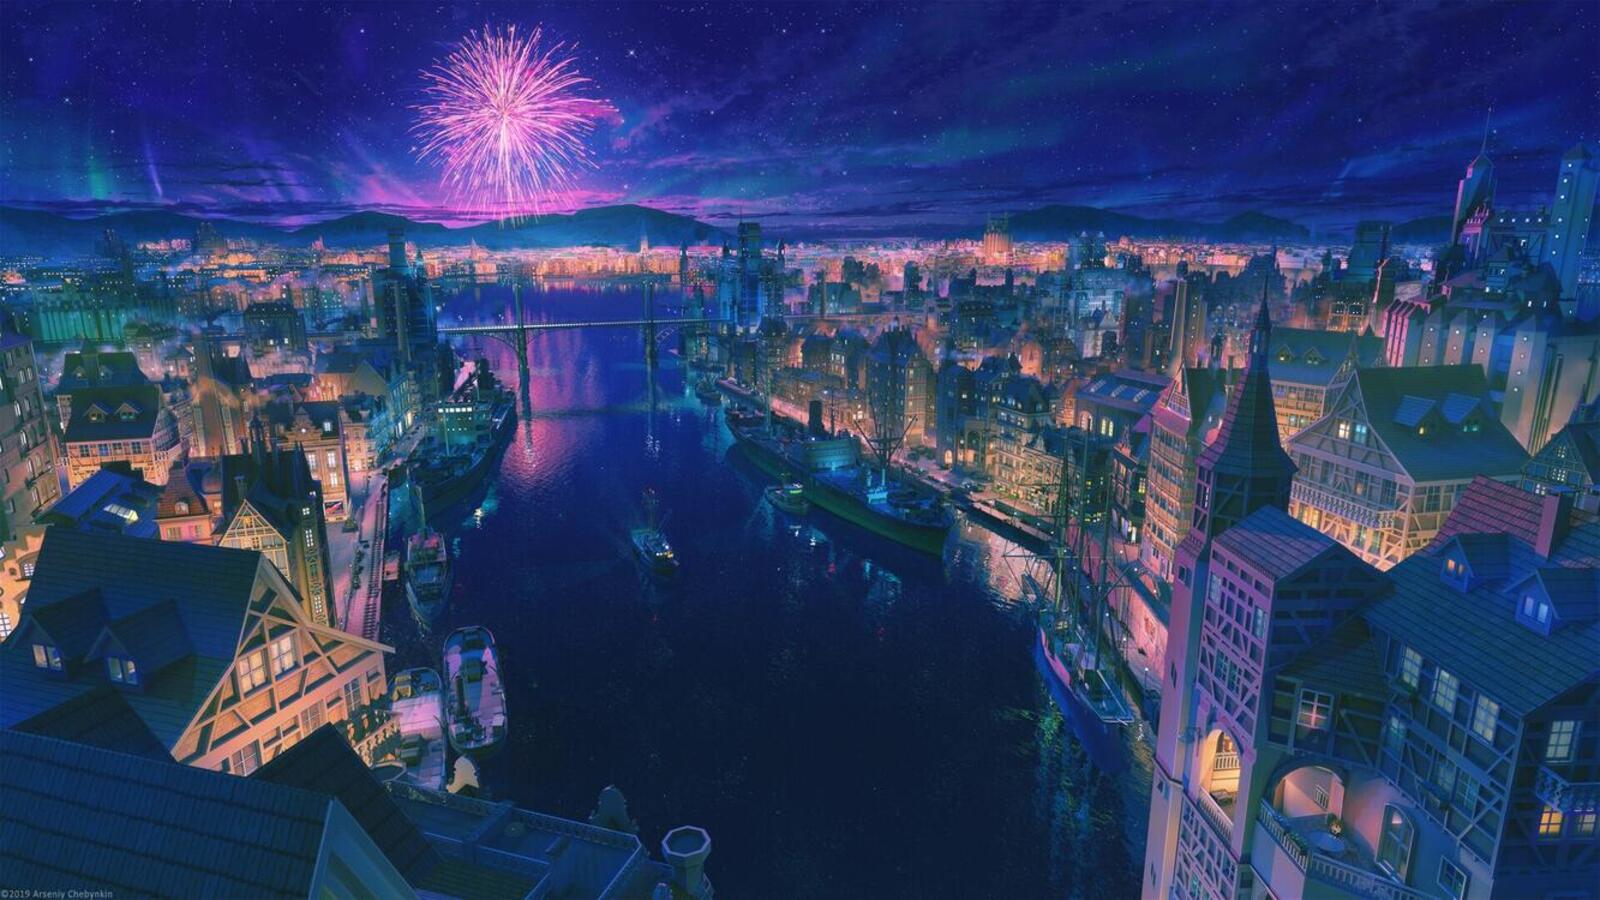 Wallpapers anime cityscape beautiful fireworks on the desktop